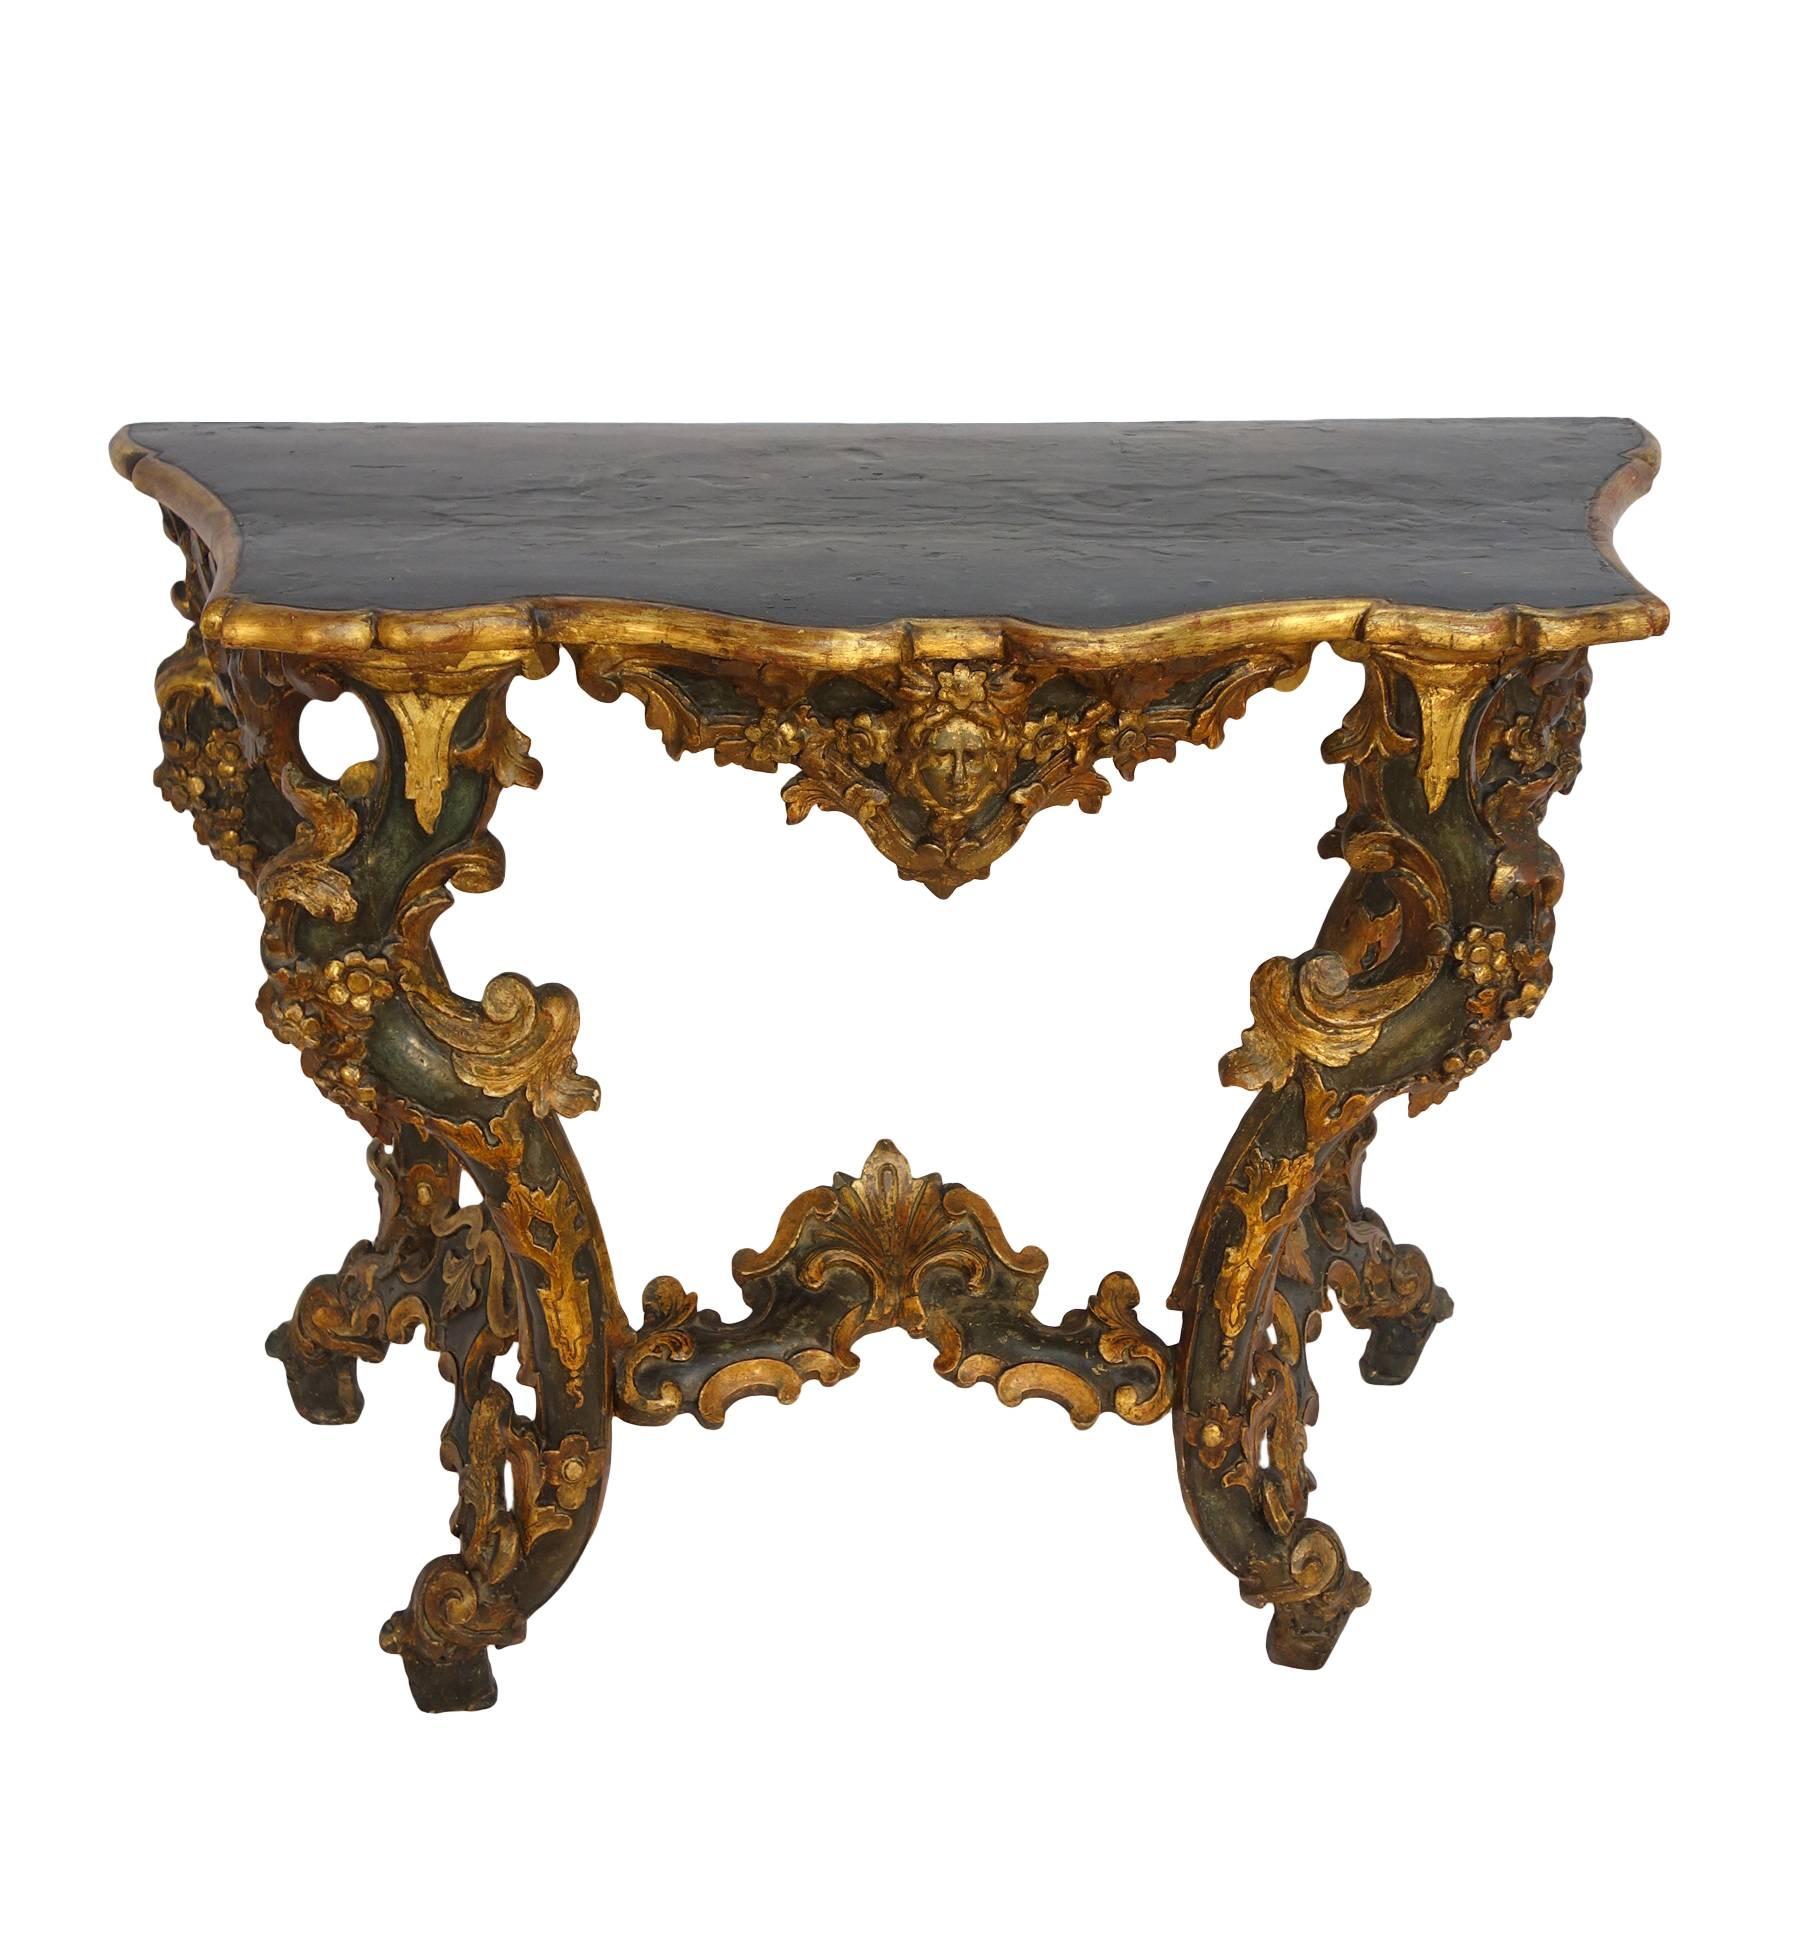 Unique pair of 18th Century painted console tables.
Dark green blue painted with gold gilt details on faces and on the details of the fruit triumph decoration around the legs structure and beautiful cross bar motifs. The whole surmounted by